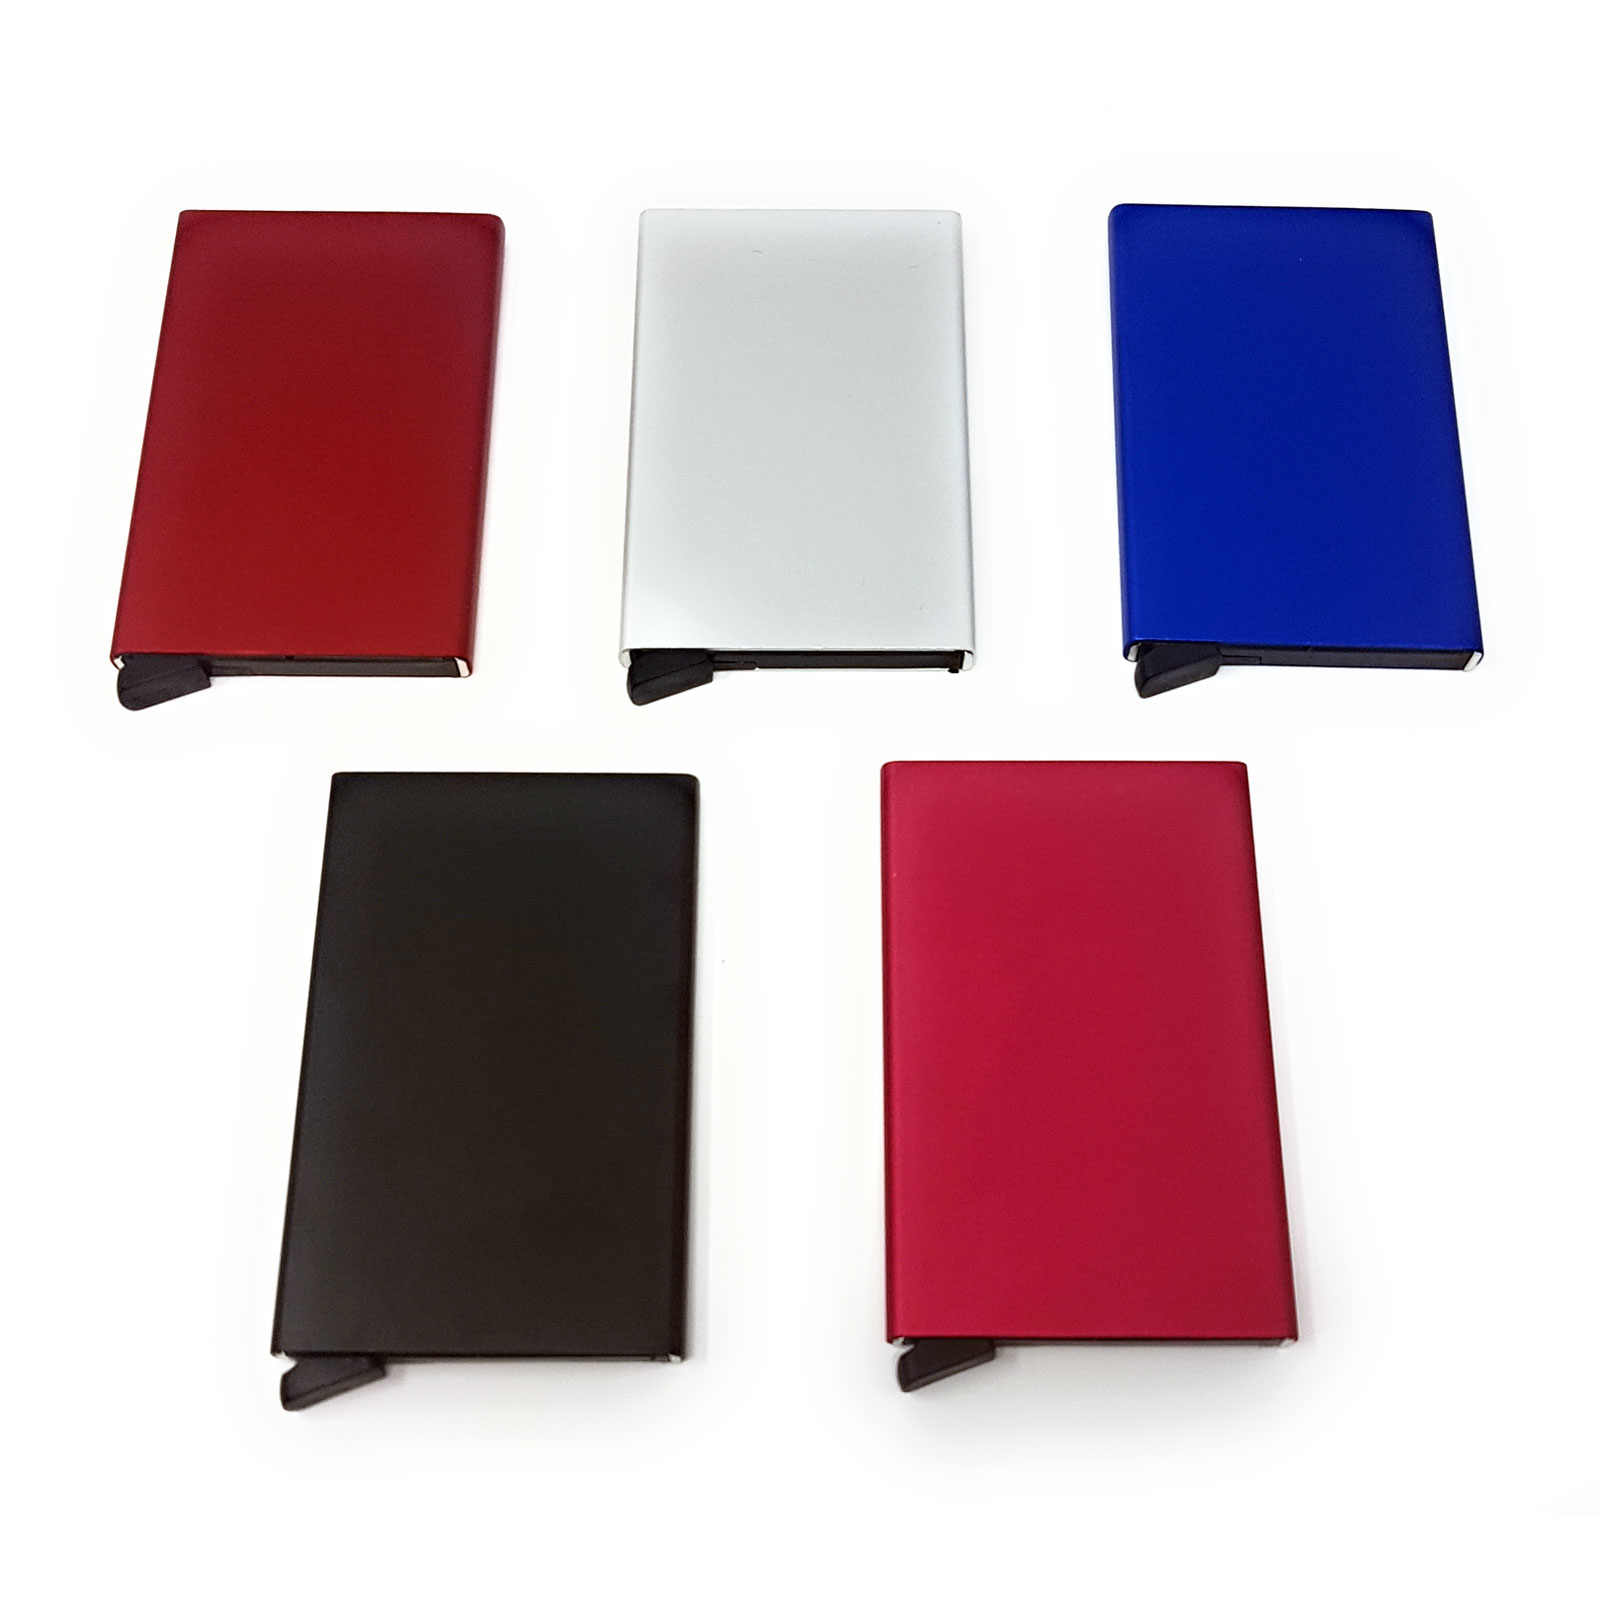 50x Mixed Colour Pop Up RFID Protective Card Holder